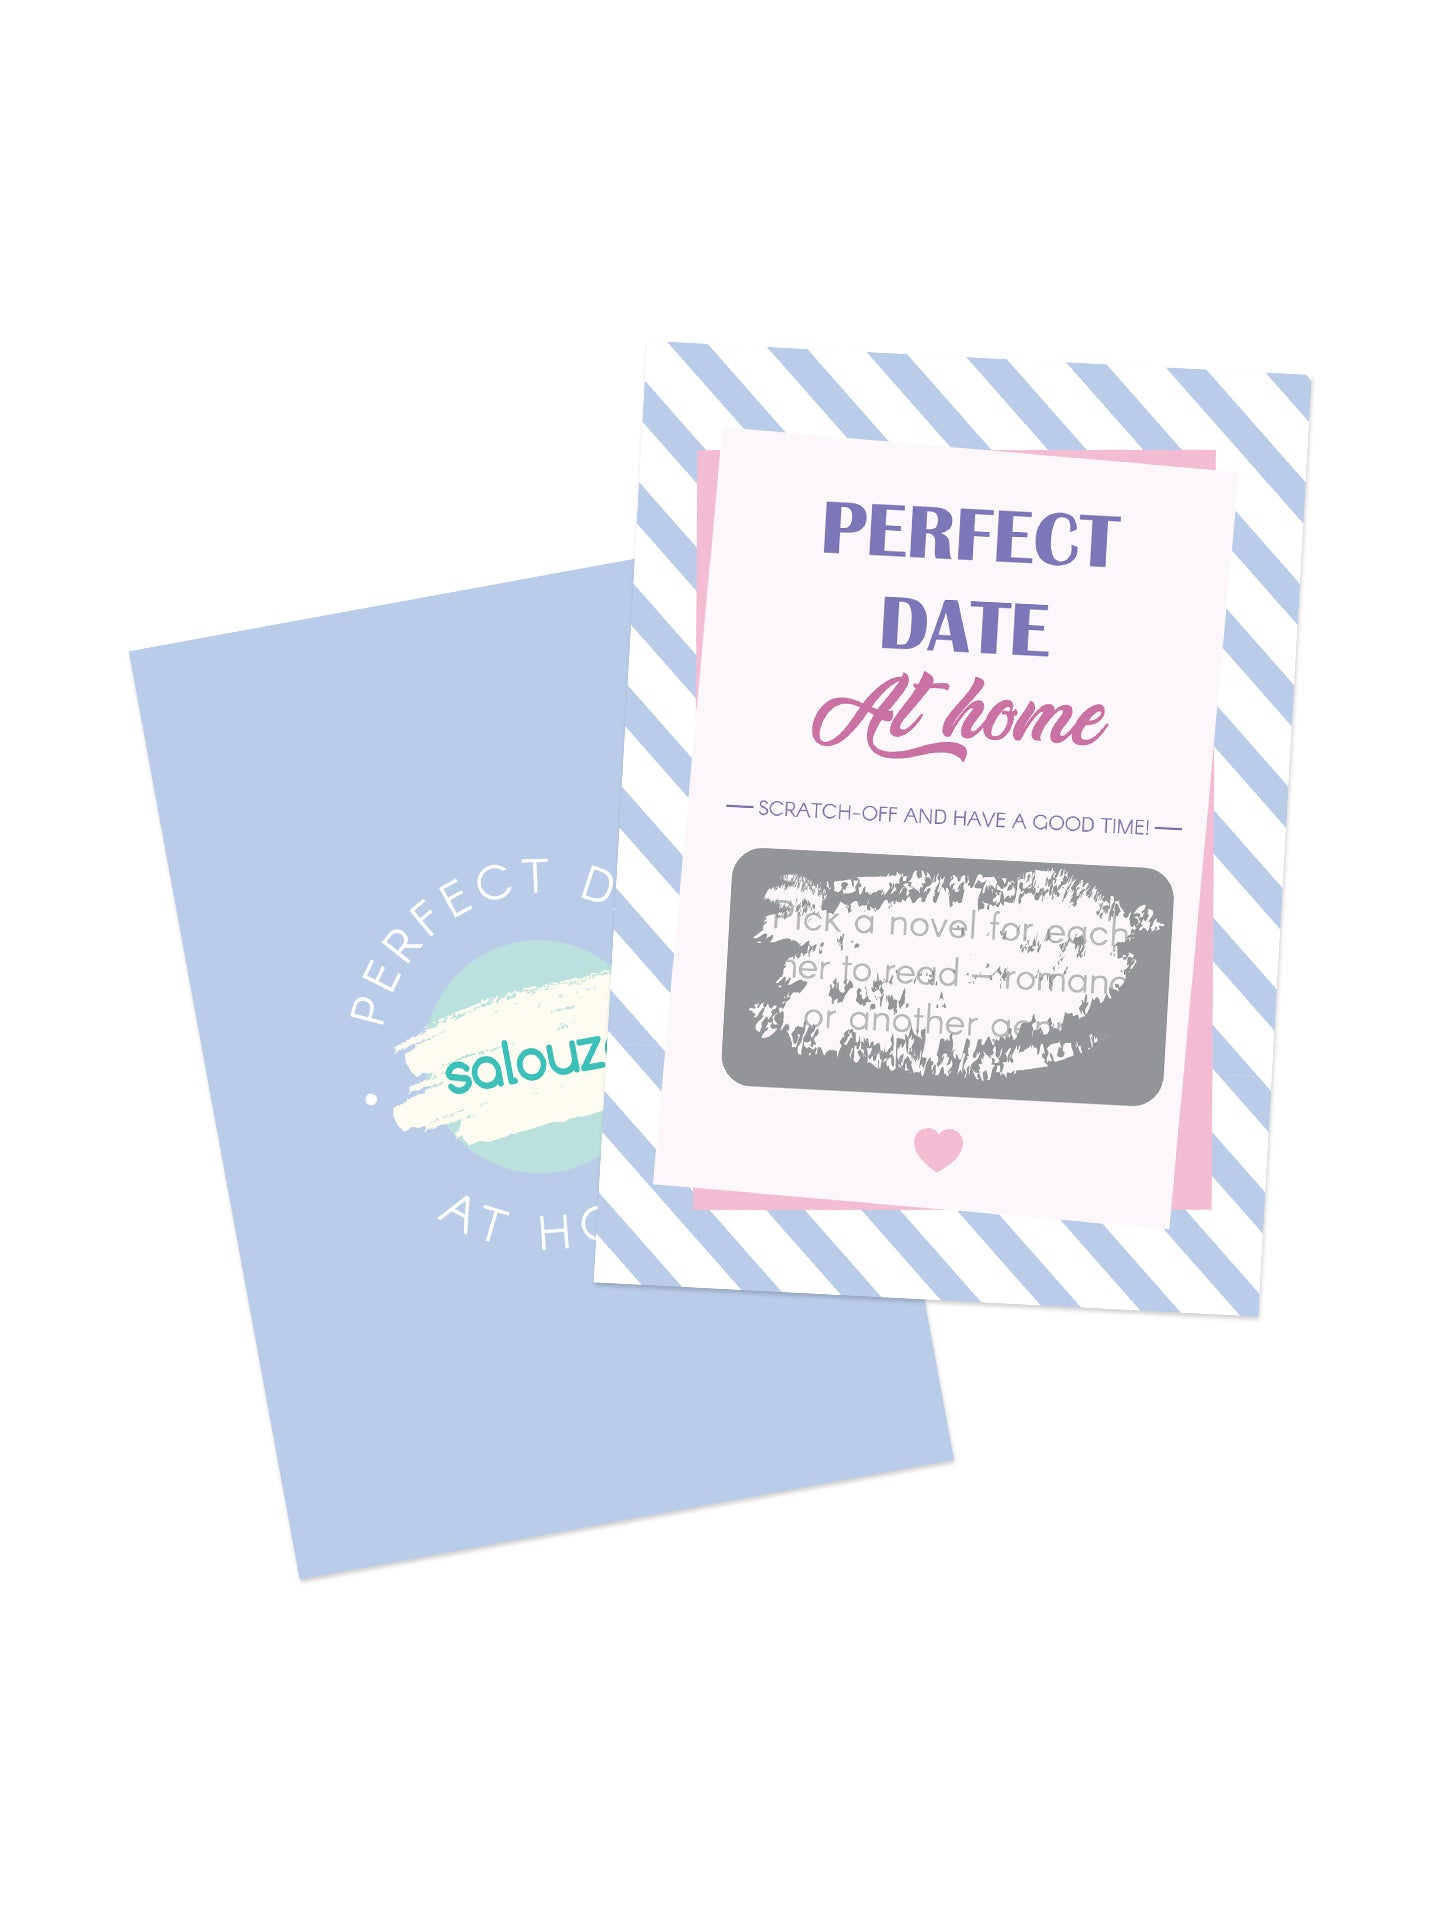 Scratch-off cards "Perfect date: At home"